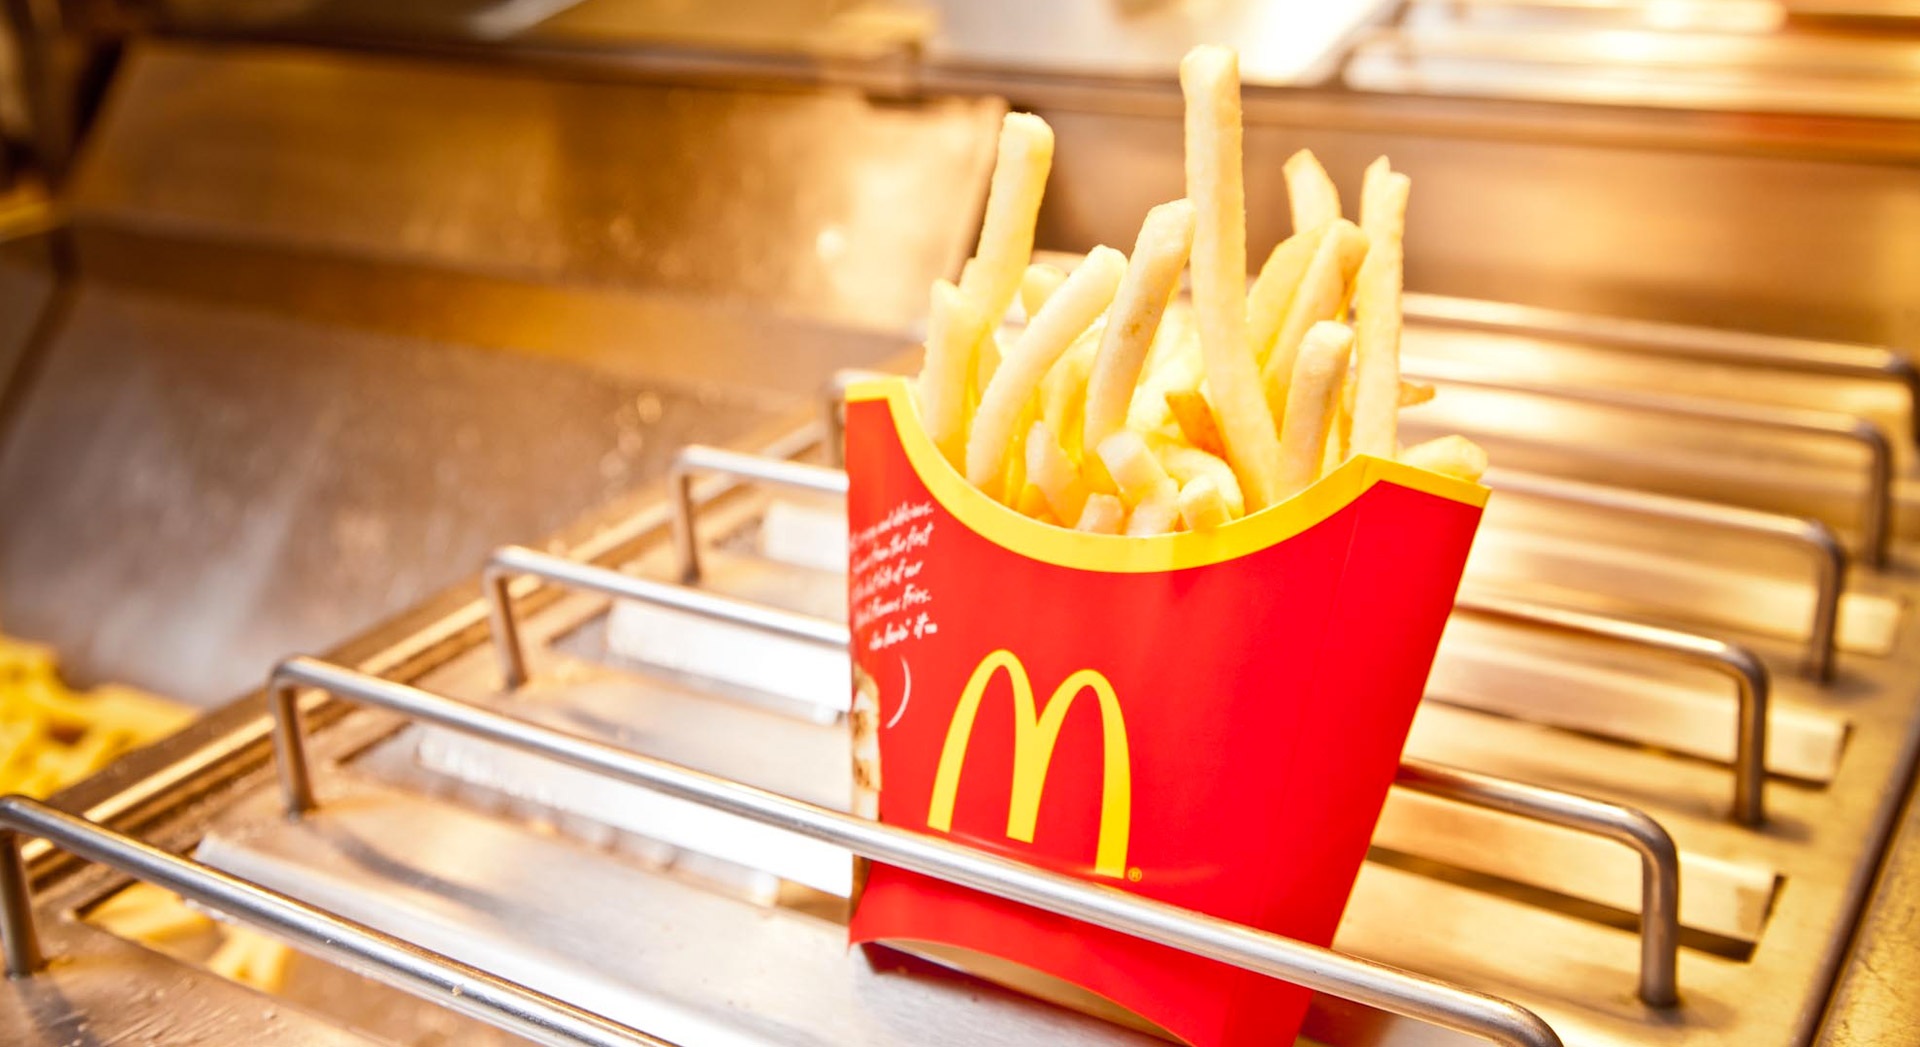 Know Our Food - Which potato whiteners (sulphur dioxide, sulphites) do McDonald's use to preserve their fries?